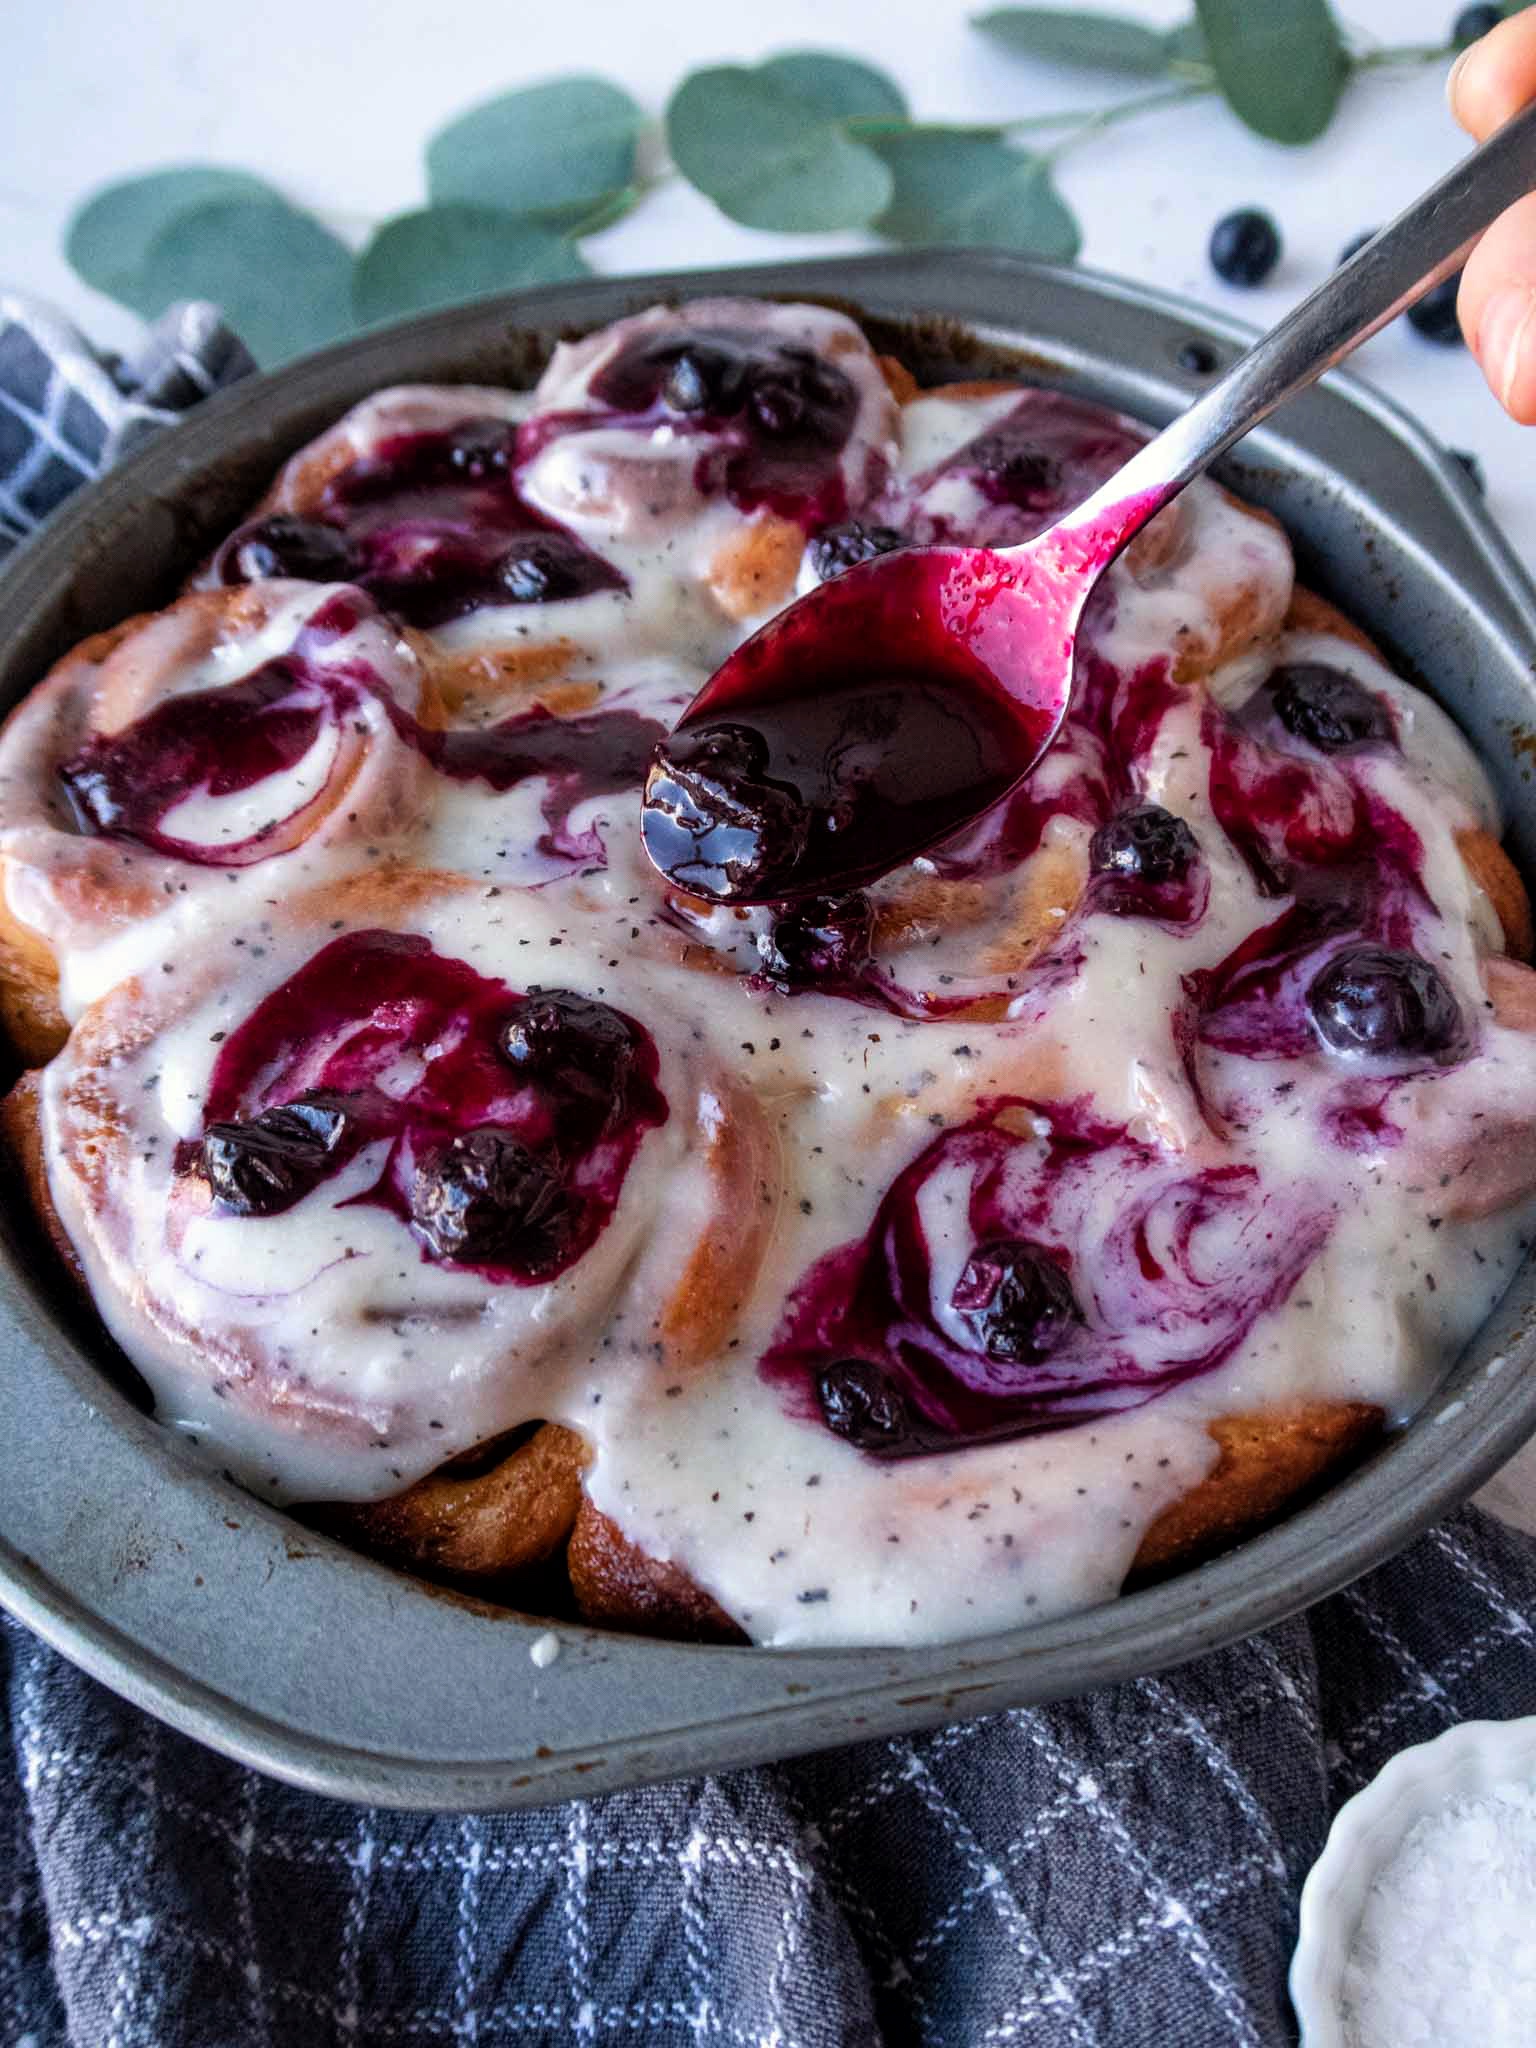 Spoon the blueberry compote onto the Earl Grey Cinnamon Buns